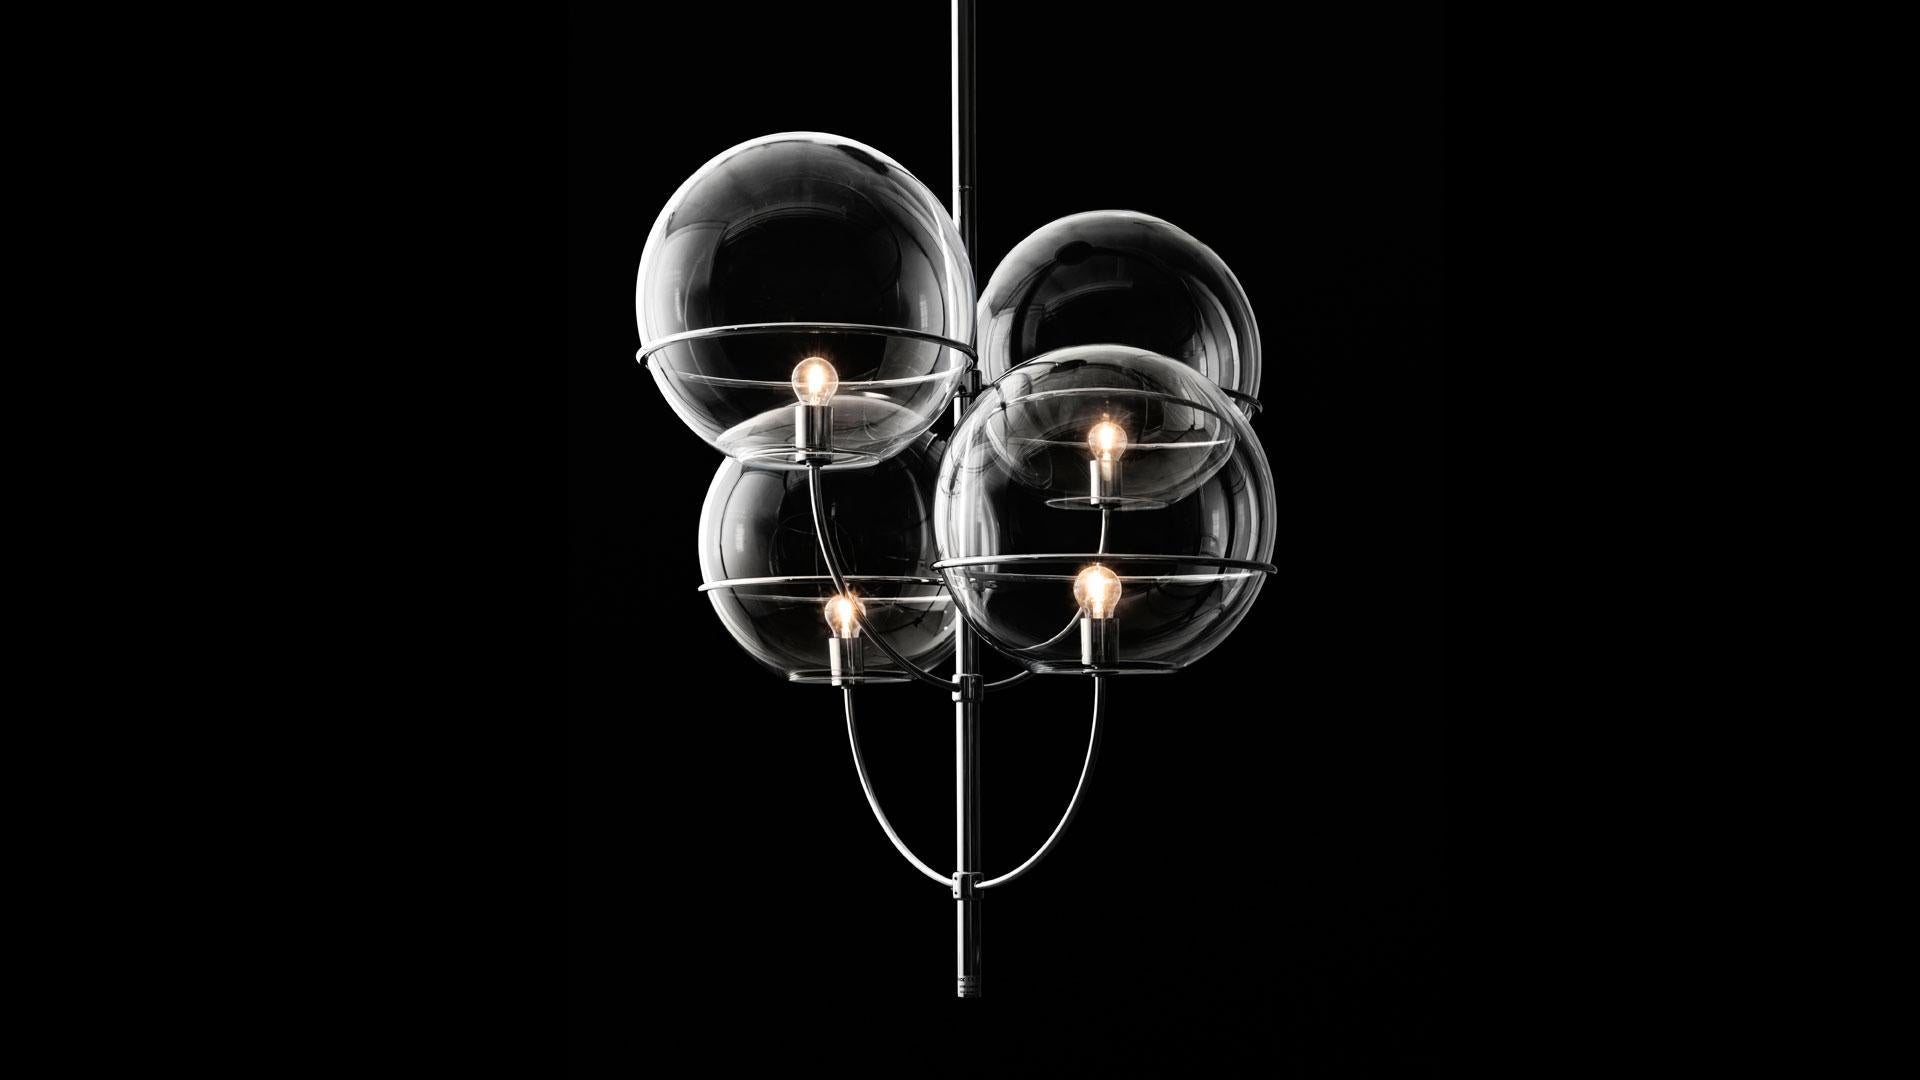 Lyndon 450 suspension light by Vico Magistretti for Oluce. Originally designed in 1977. Current production manufactured in Italy. Chromium-plated metal structure, globes in transparent glass. The chrome-plated finished candelabra-style body, typical